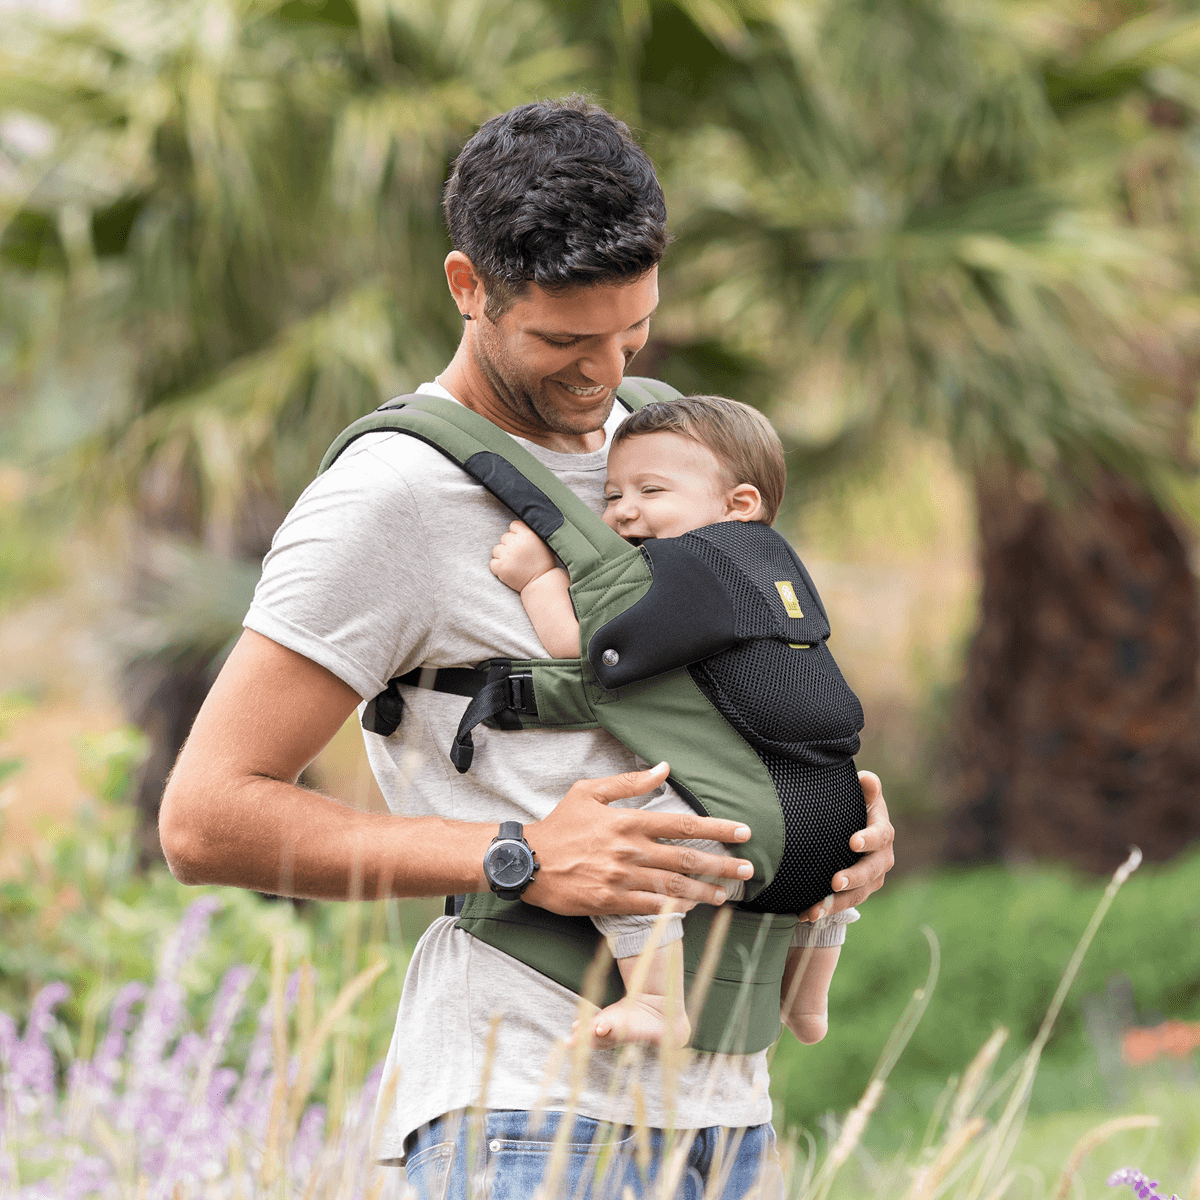 Dad holding baby in a green LILLEbaby Complete carrier